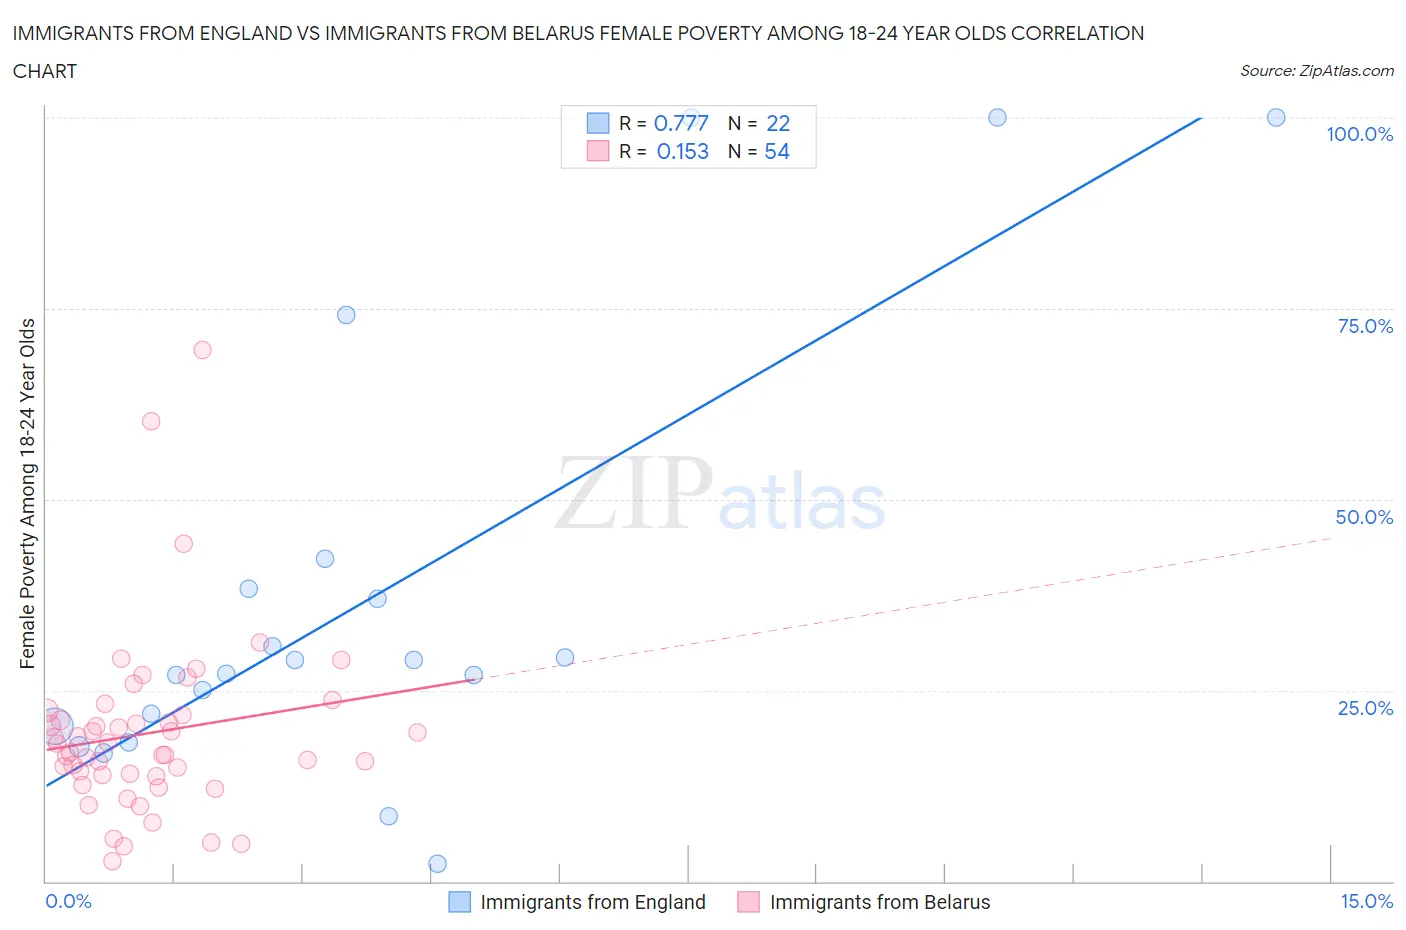 Immigrants from England vs Immigrants from Belarus Female Poverty Among 18-24 Year Olds